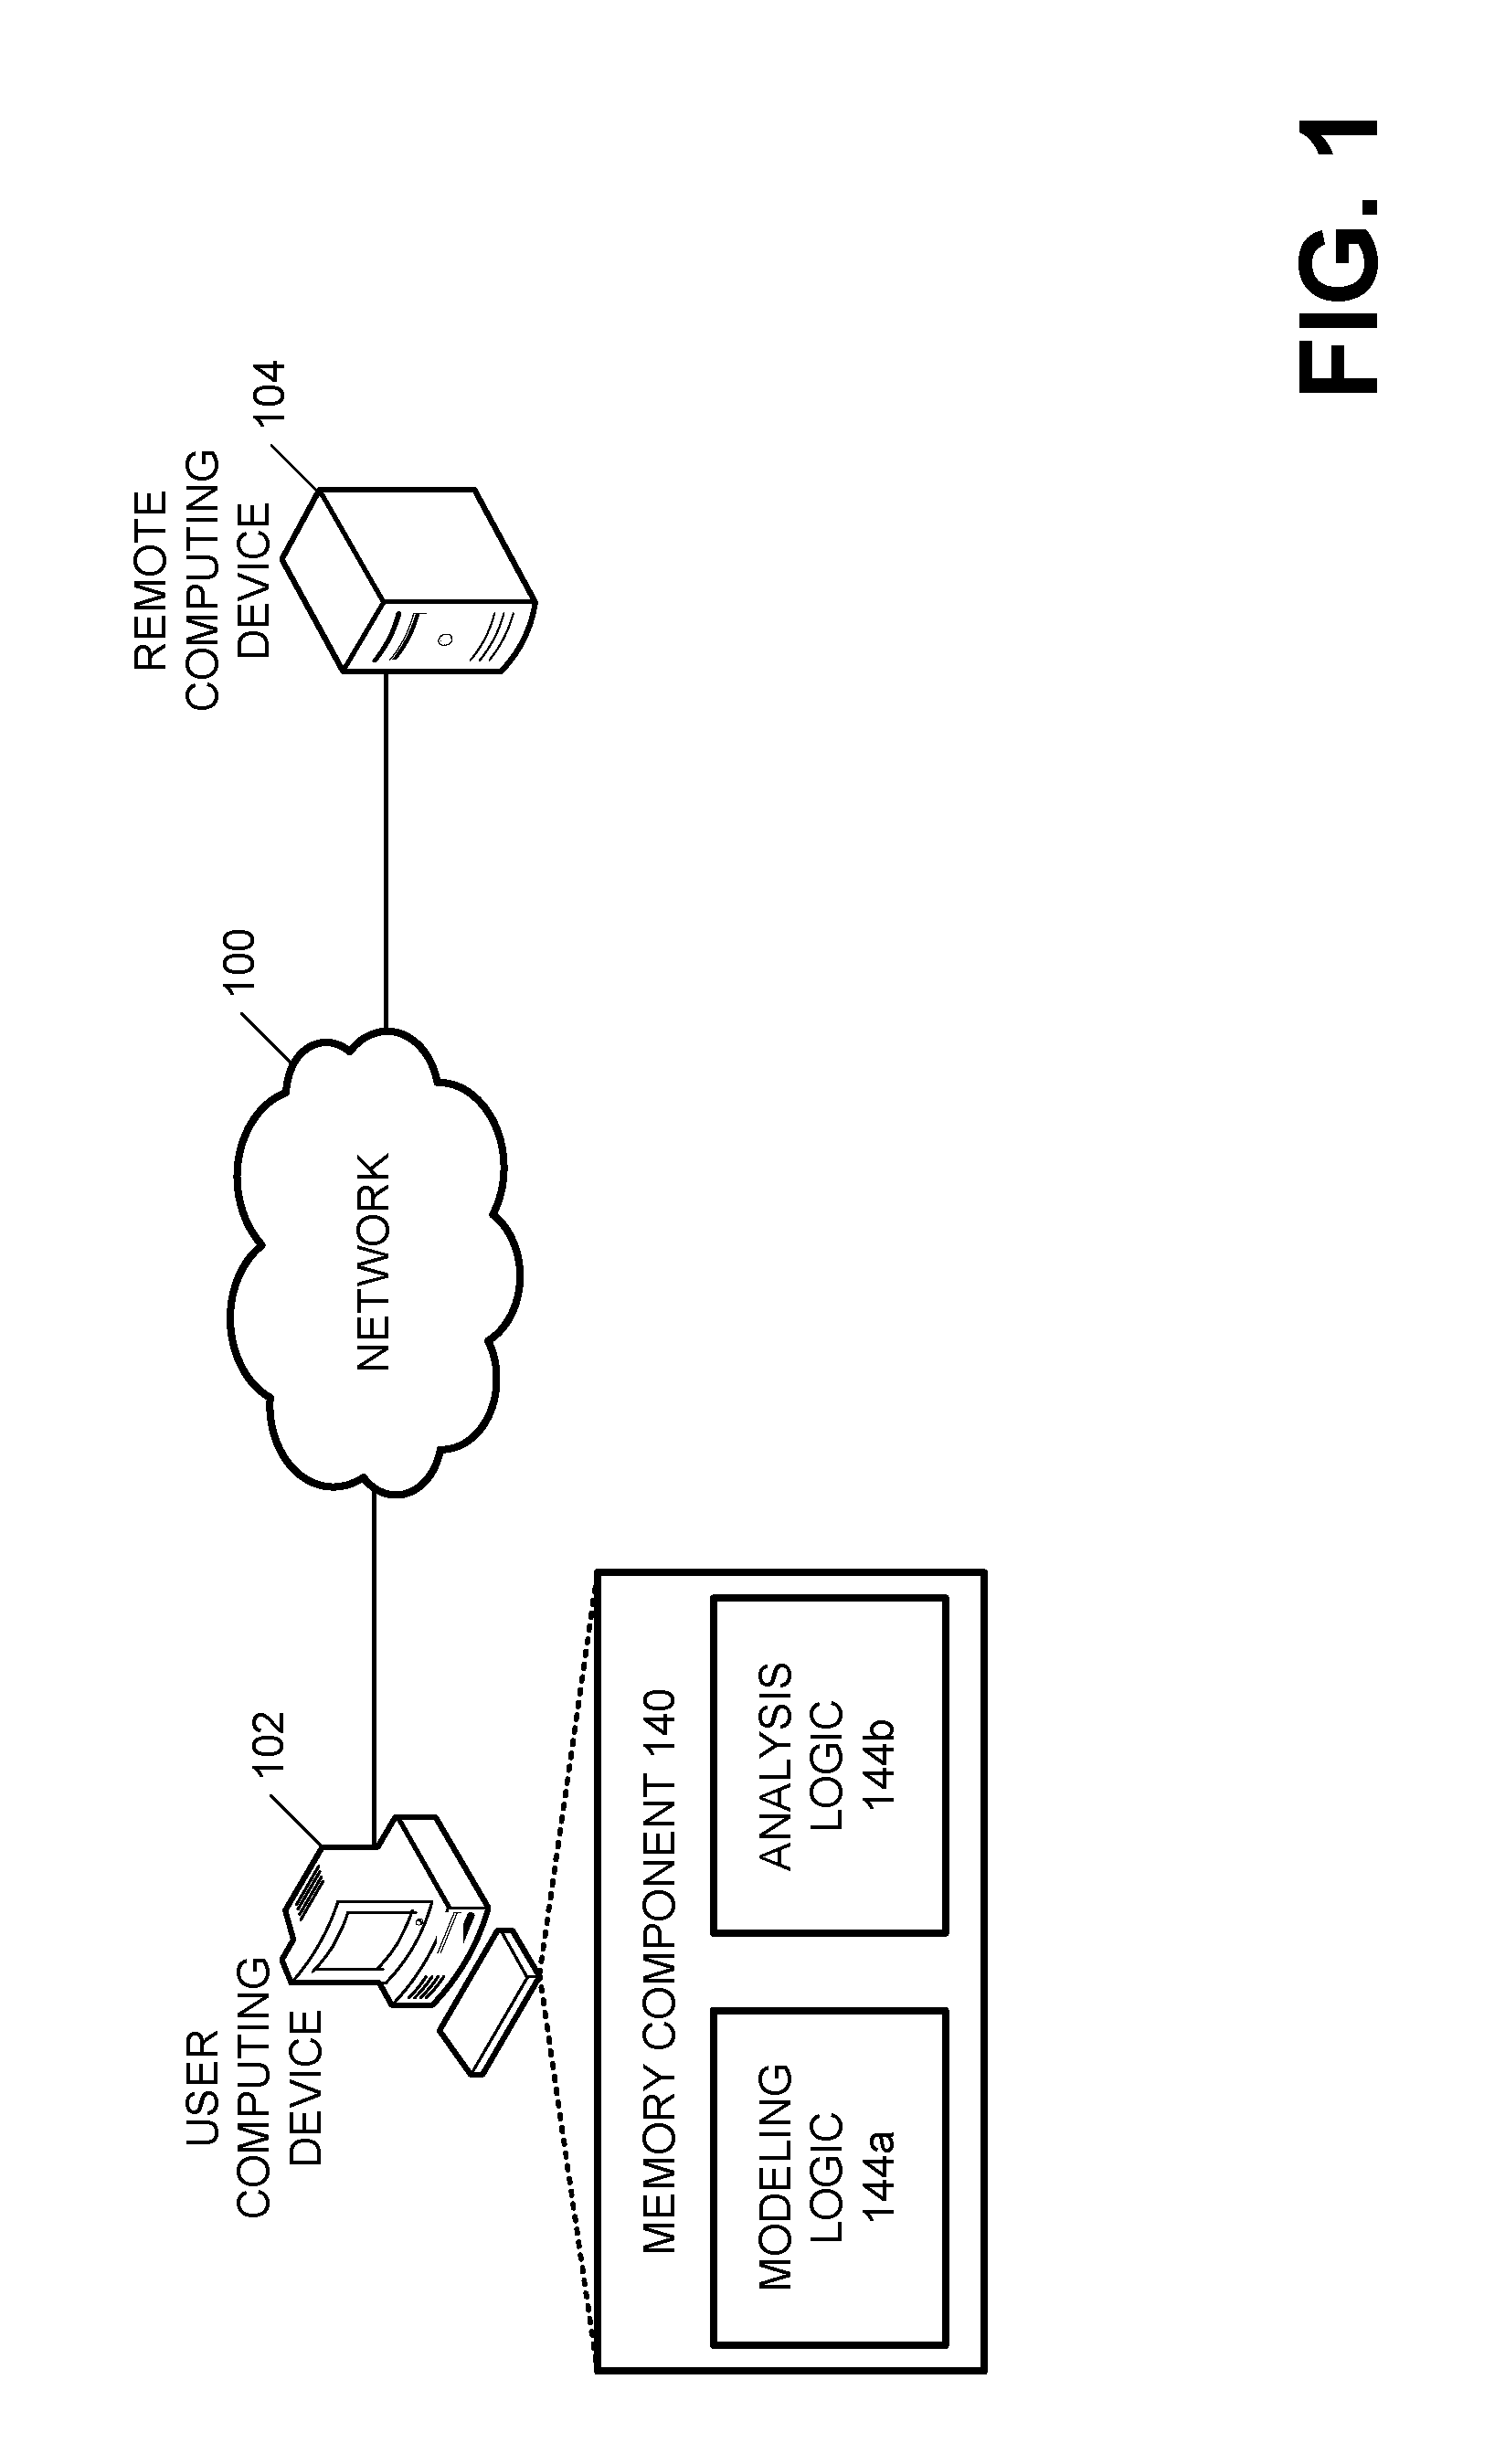 Systems and methods for product performance and perception modeling